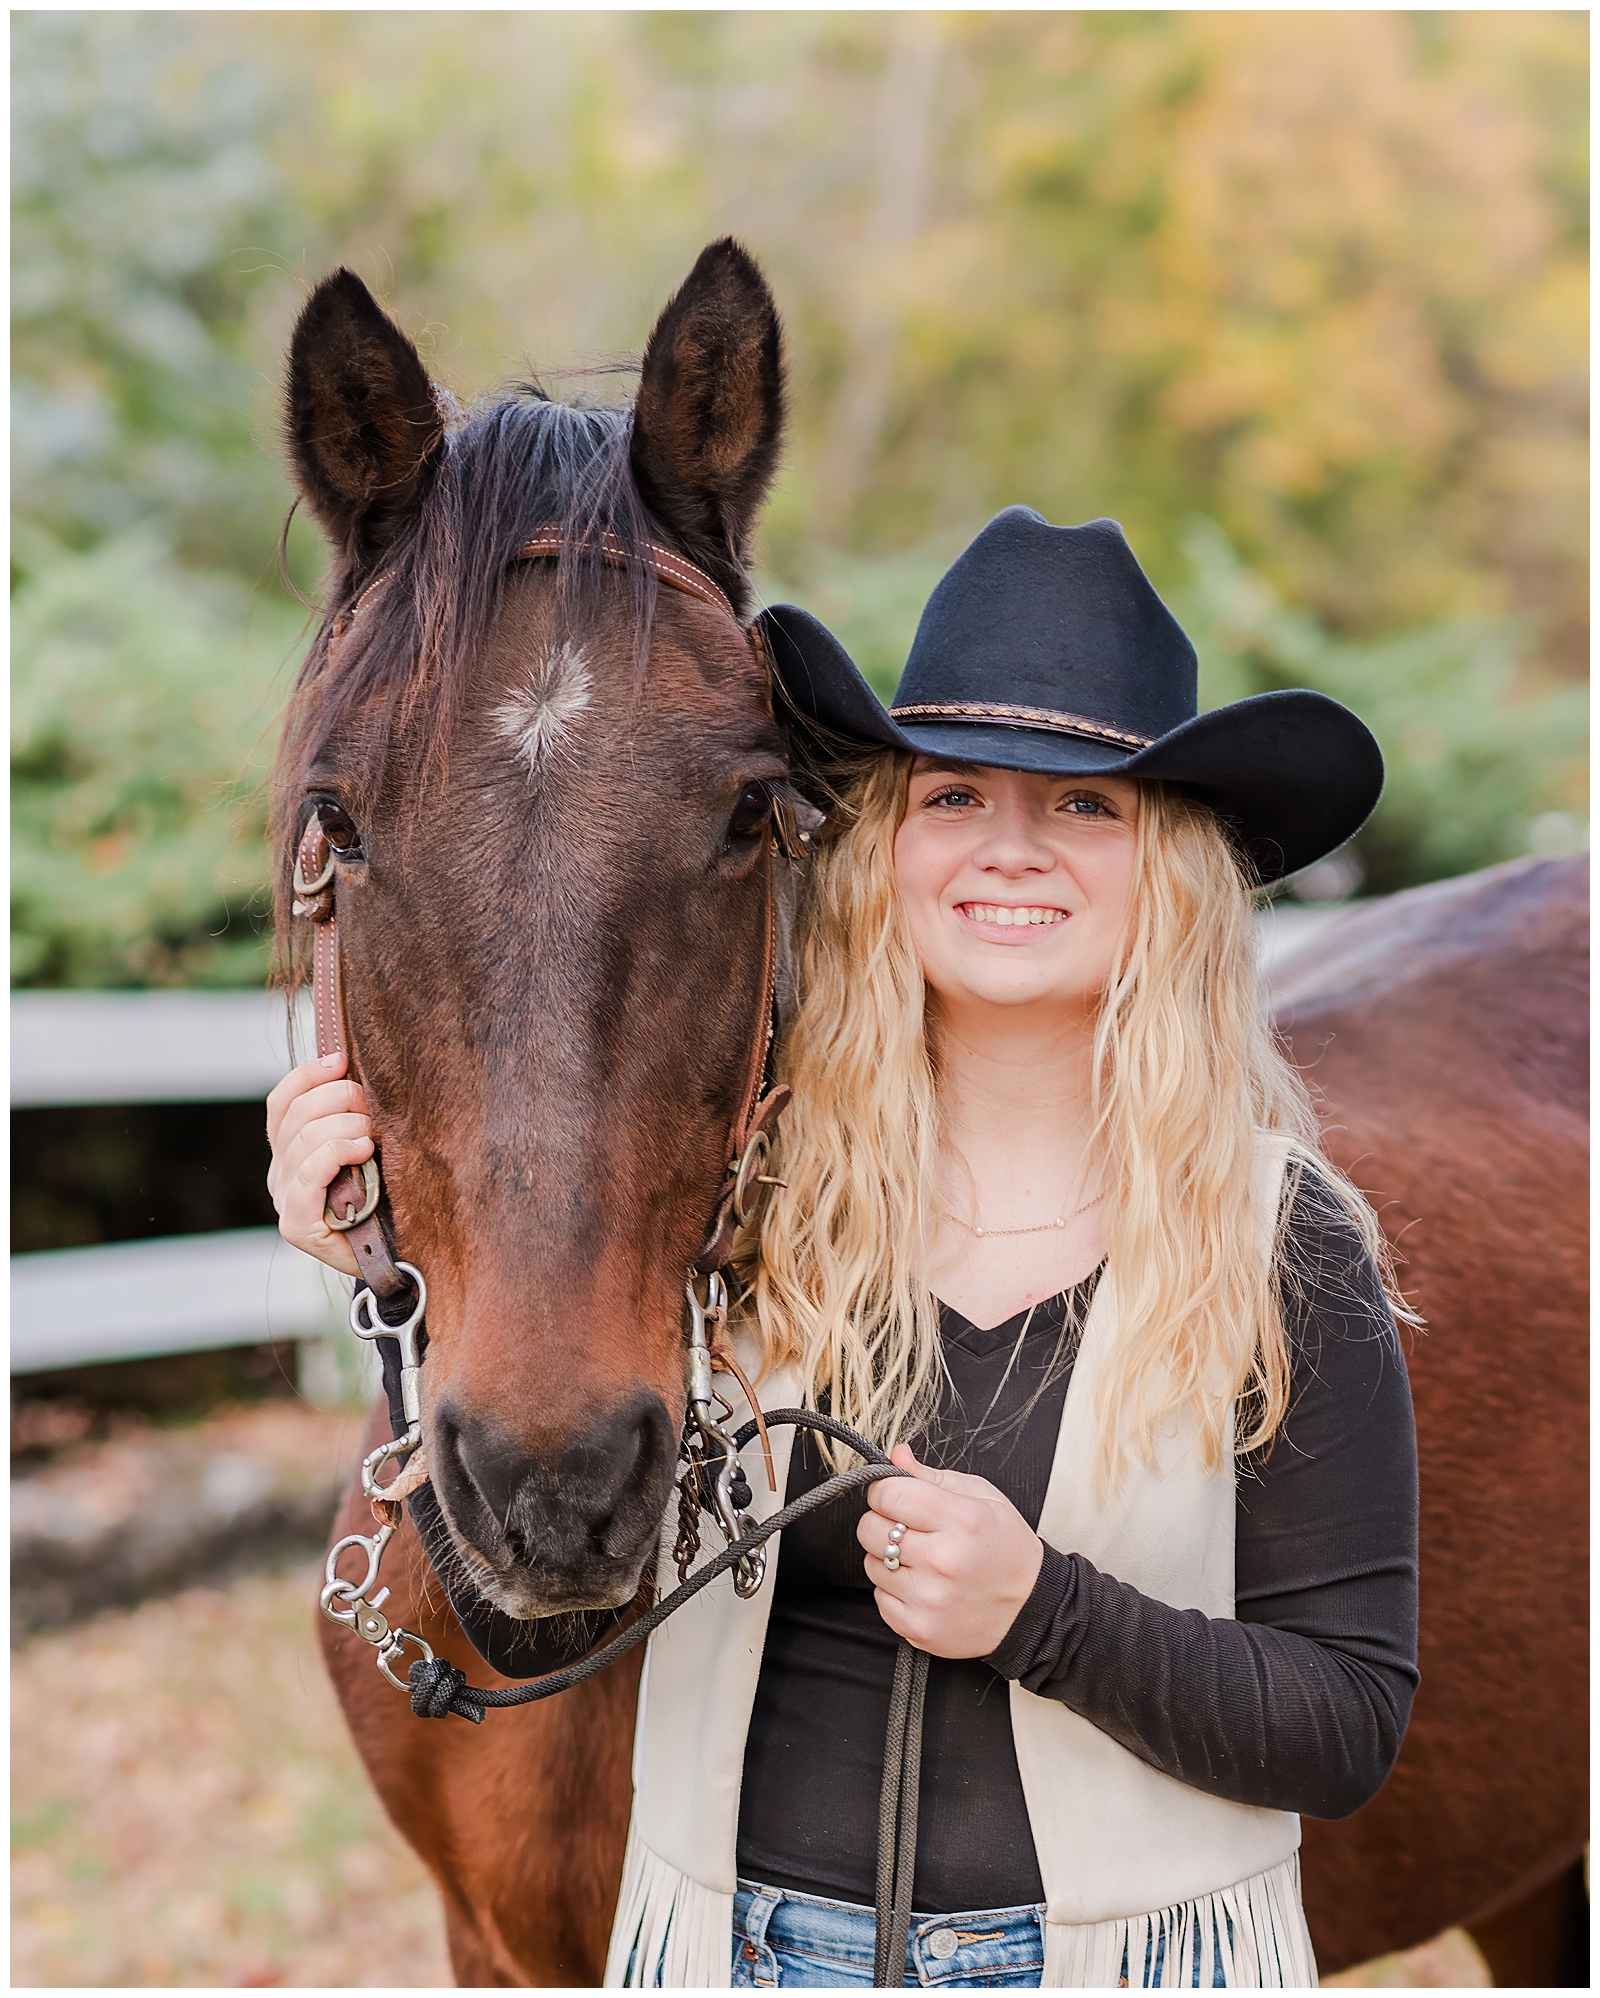 Nashville girl wearing a black cowgirl hat, standing next to a horse during her Equine Senior Session.